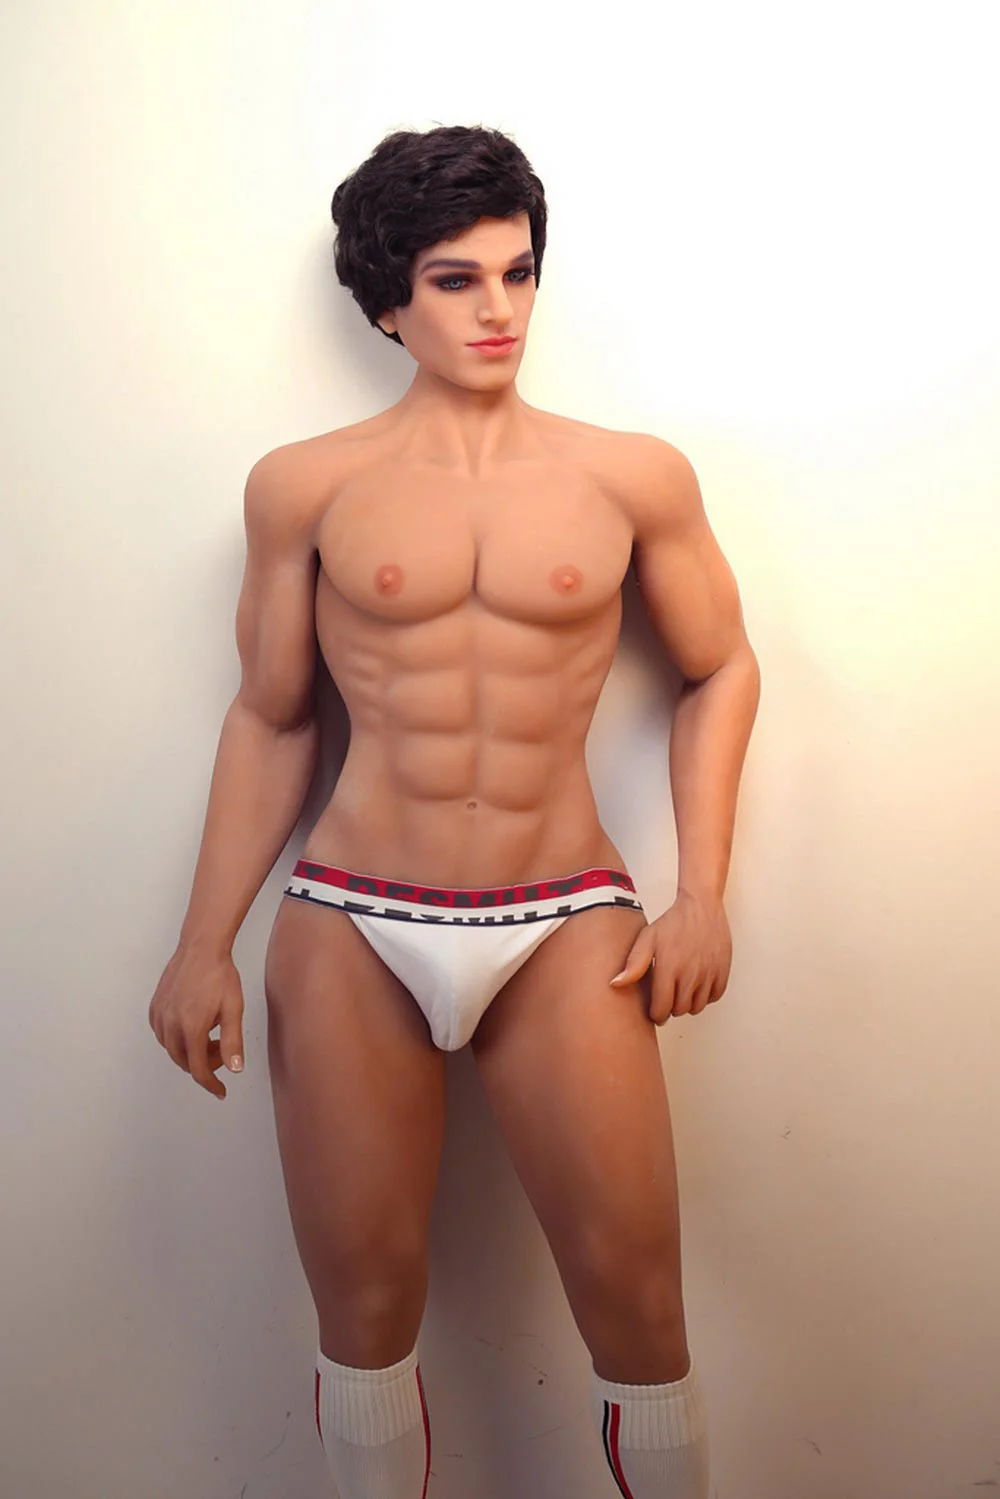 Male-sex-doll-with-hand-pinching-thigh